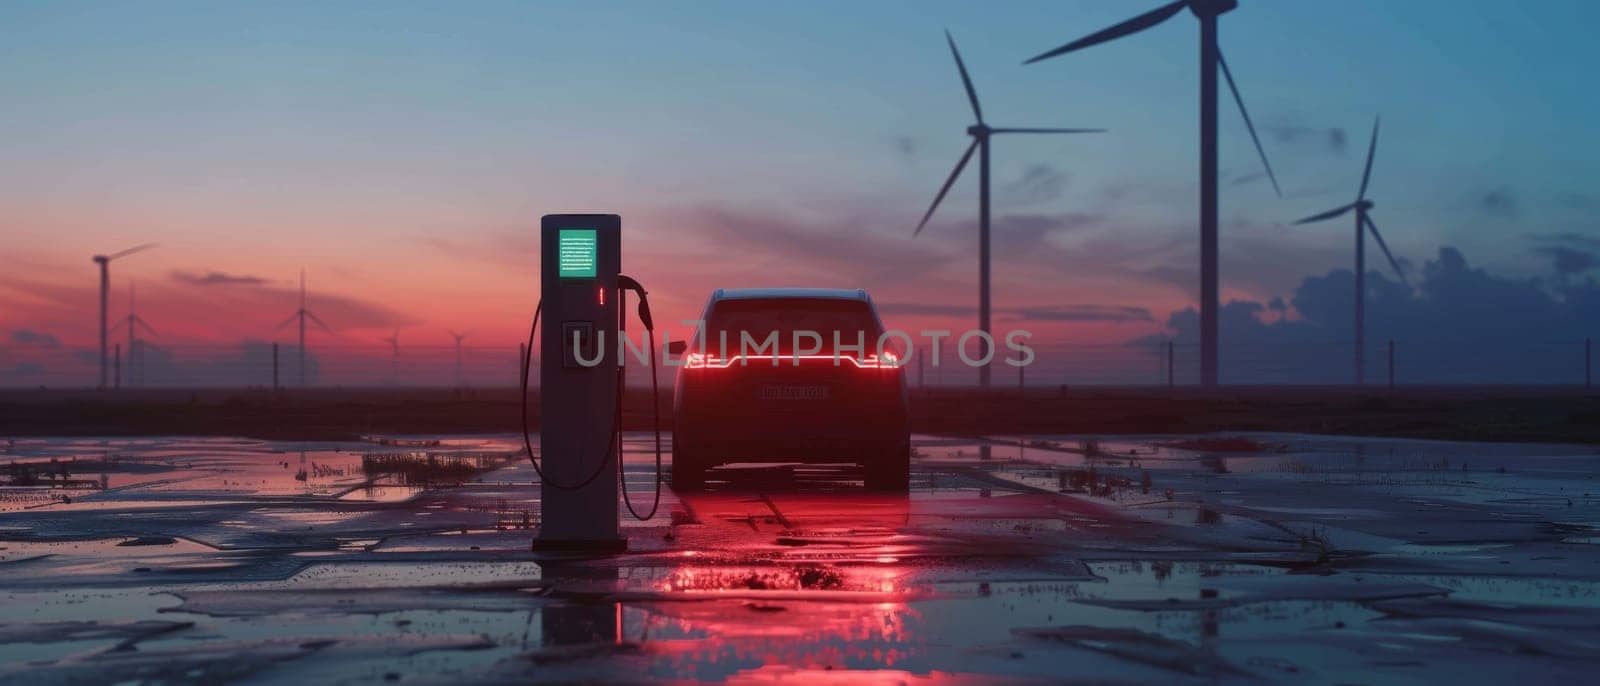 A solitary electric vehicle charges at a sleek station, highlighted by the ambient glow of a vibrant sunset with distant wind turbines silhouetted against the colorful sky